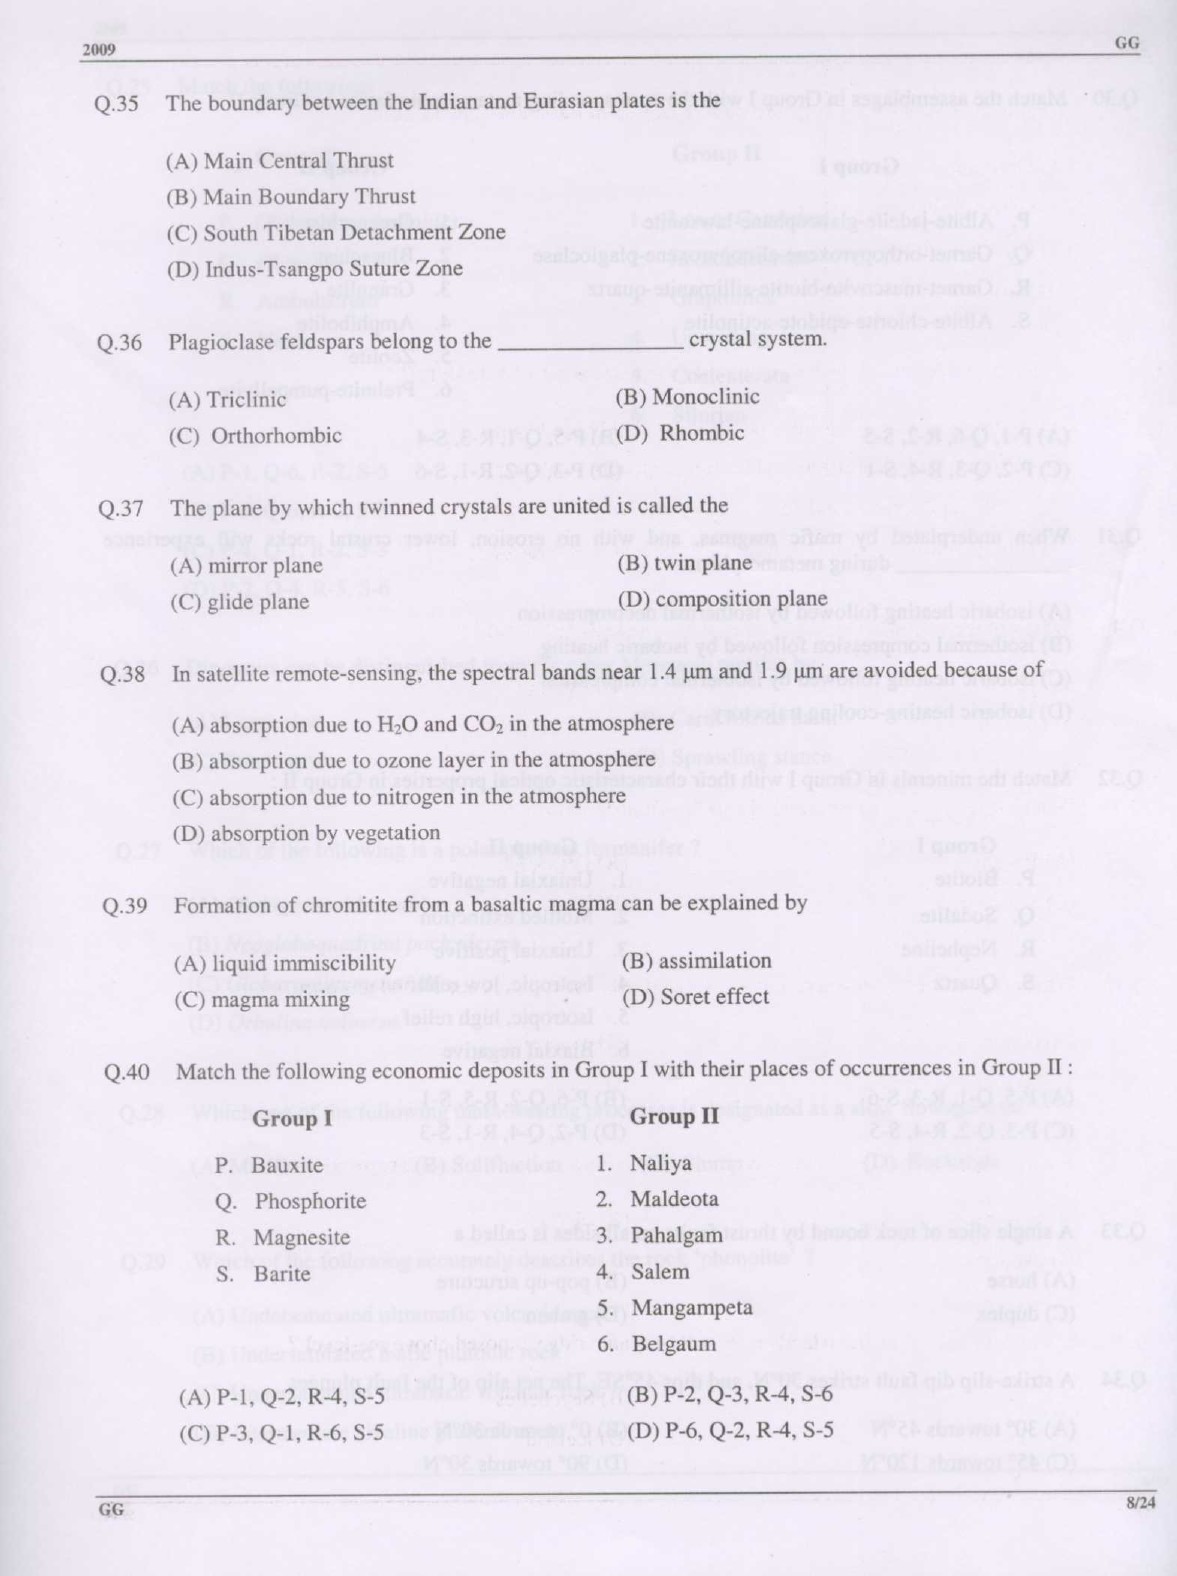 GATE Exam Question Paper 2009 Geology and Geophysics 8